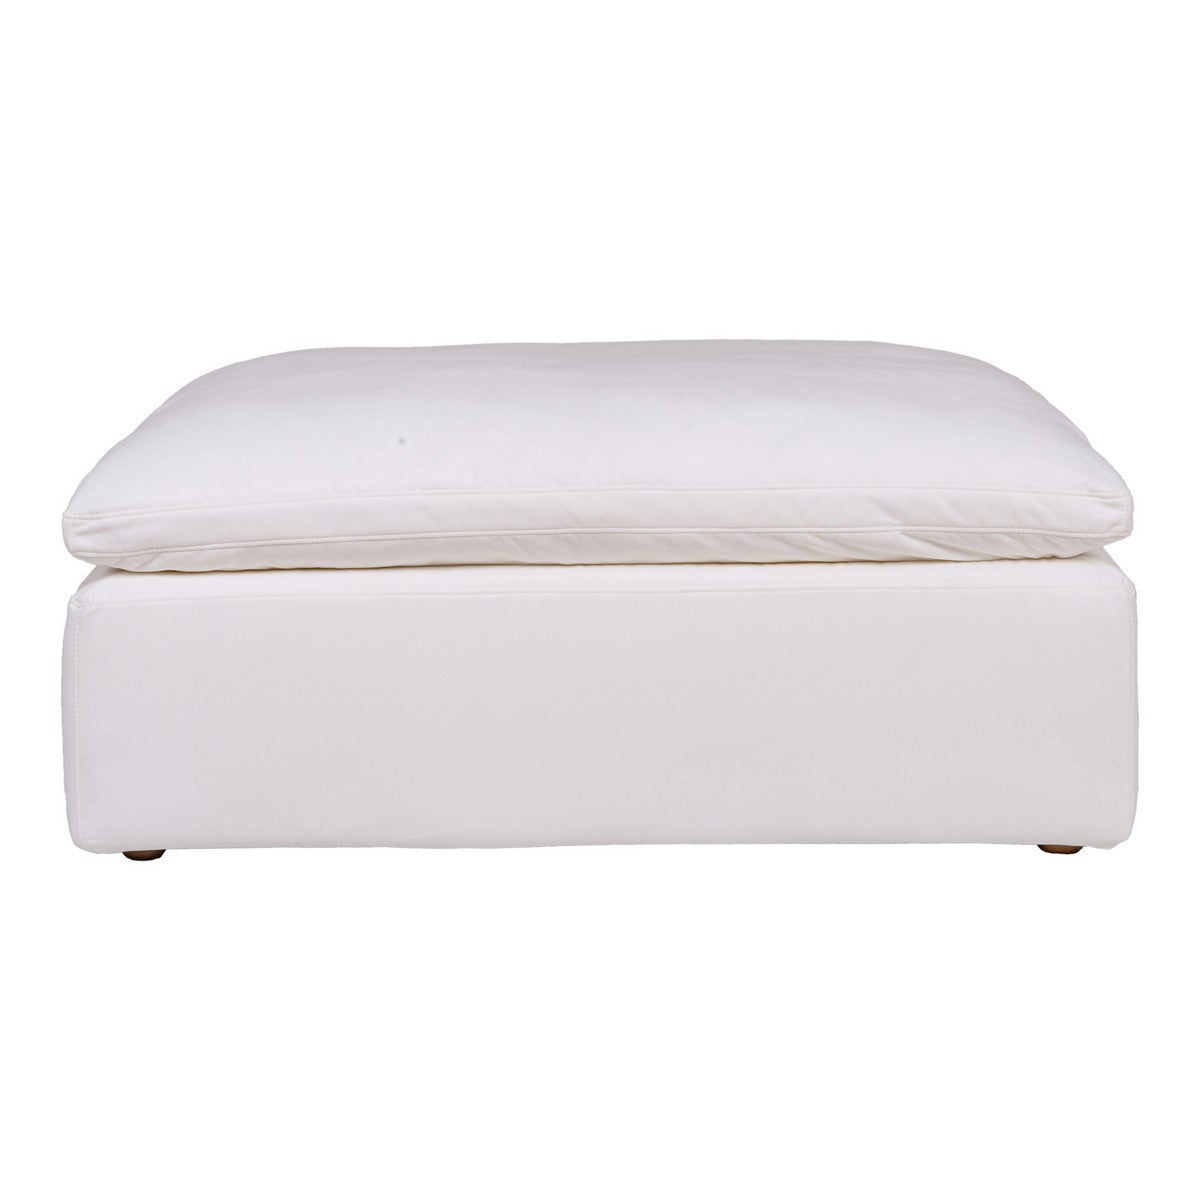 Moe's Home Collection Clay Ottoman Livesmart Fabric Cream - YJ-1002-05 - Moe's Home Collection - Ottomans - Minimal And Modern - 1